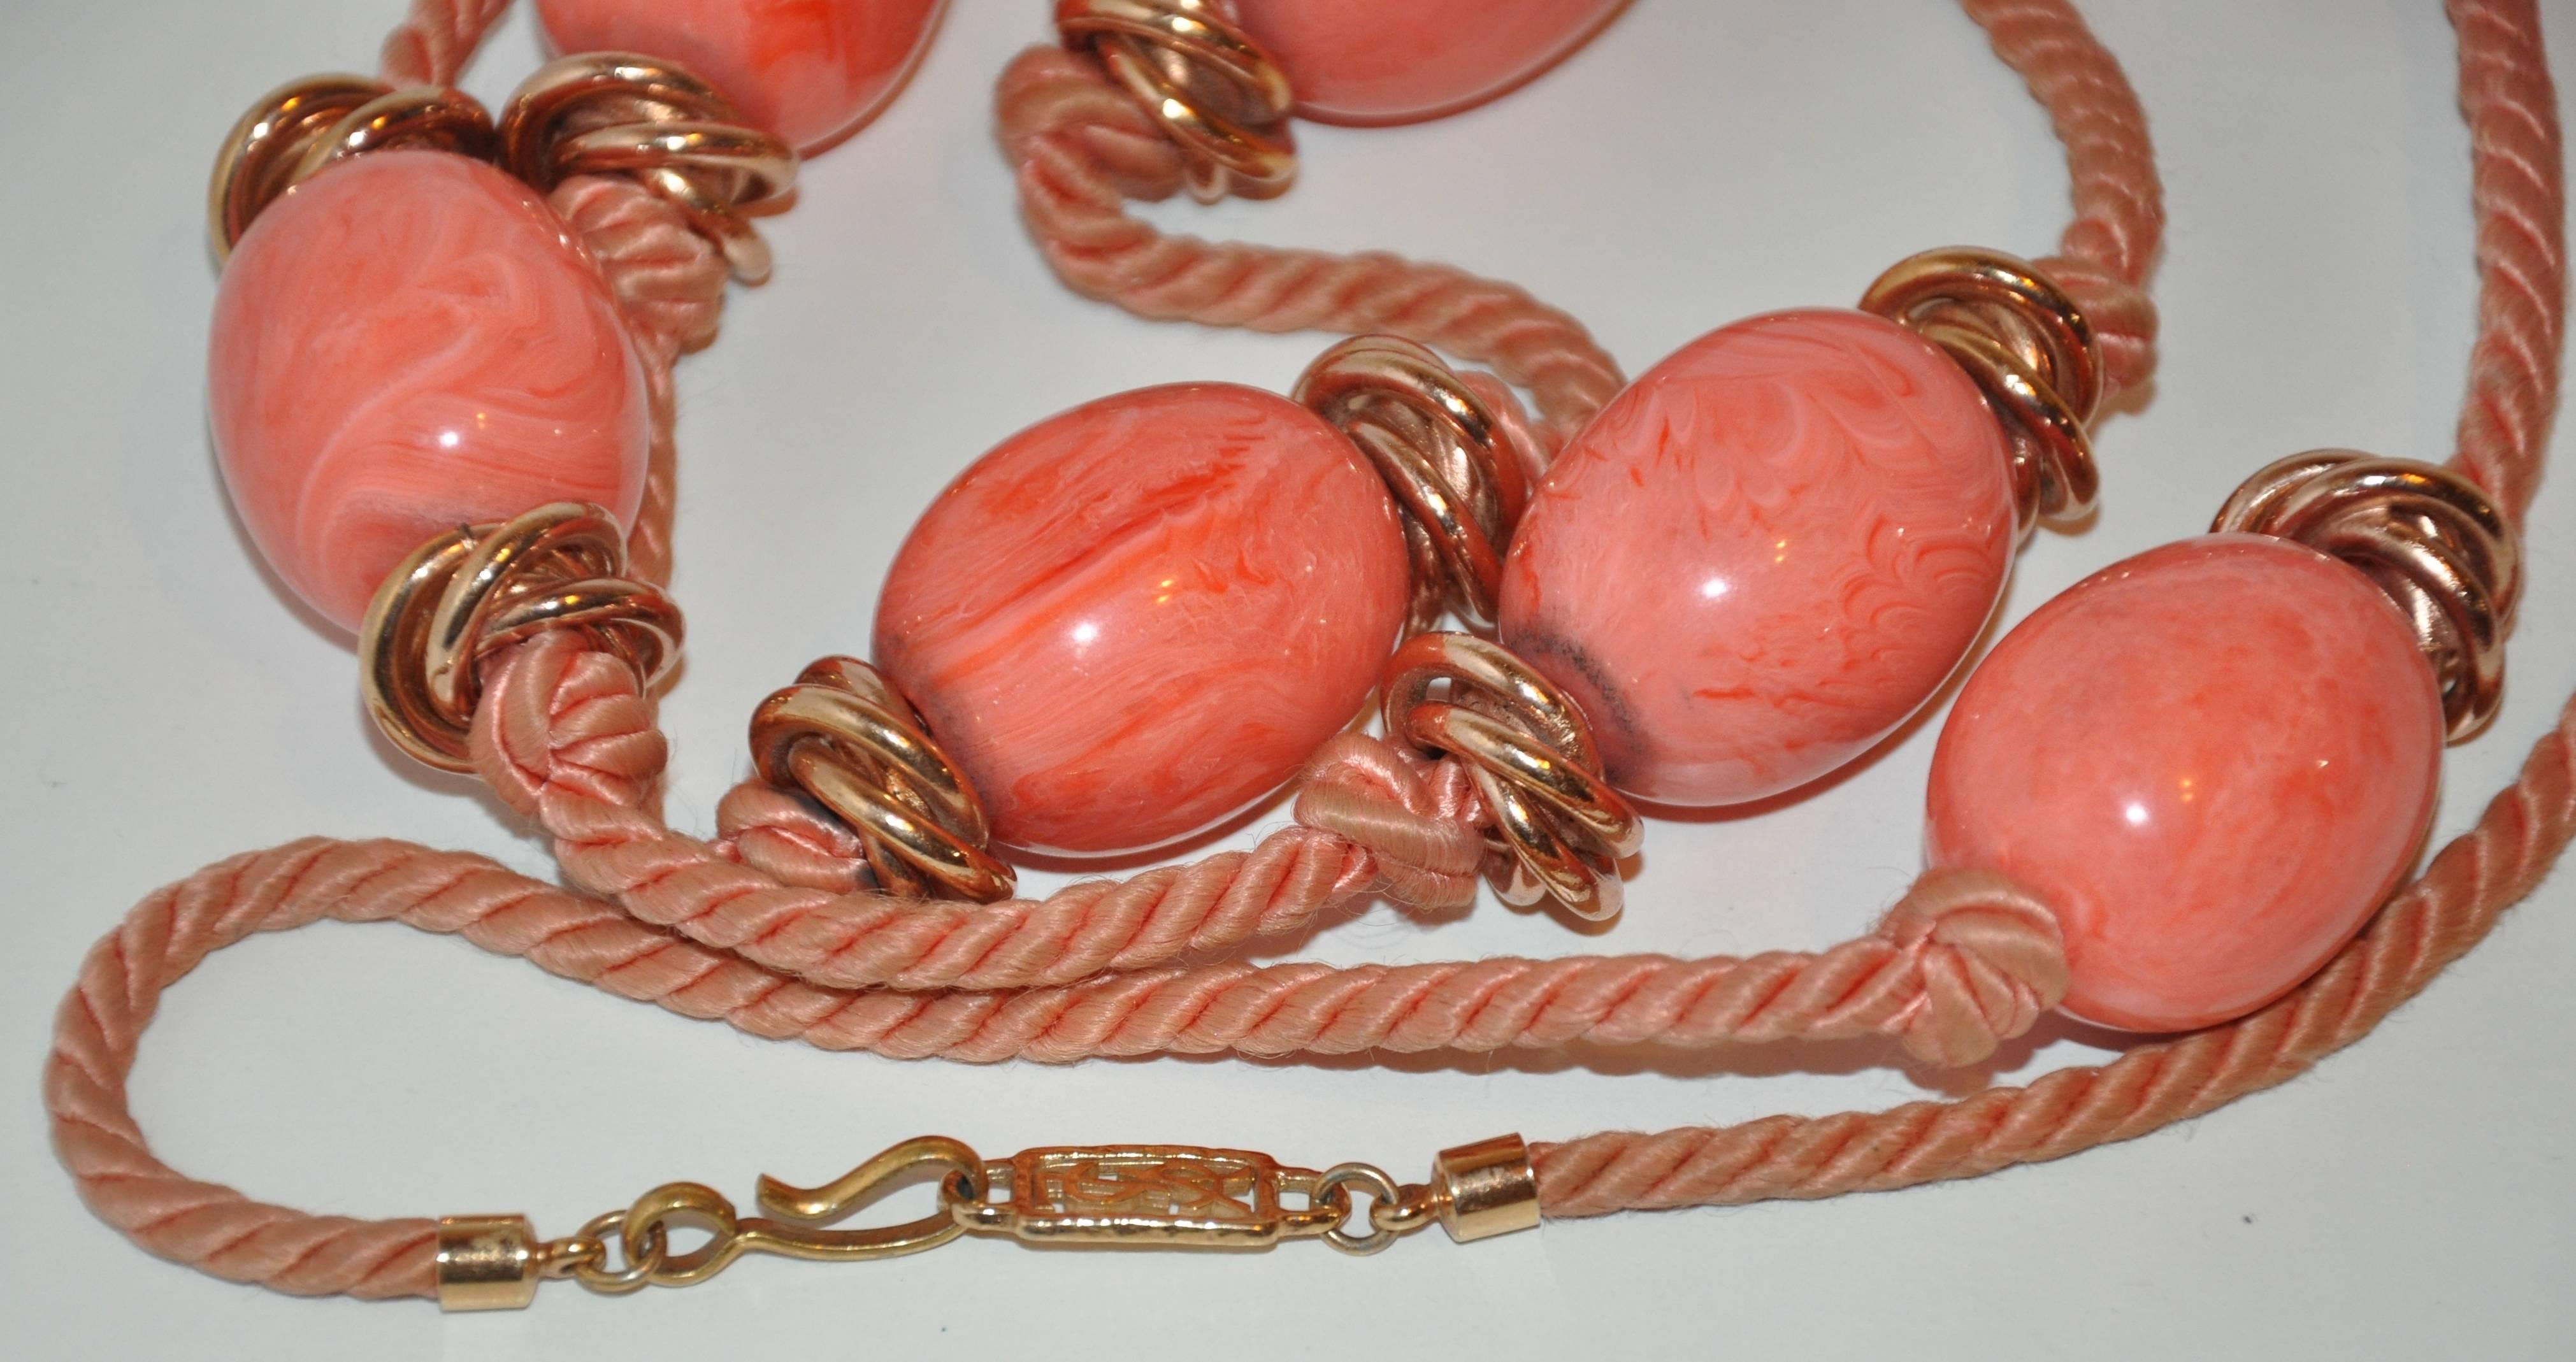         Yves Saint Laurent wonderful coral lucite accented with gold hardware on silk cord necklace measures 48" in total length and 1" in width and depth. The clasp "hook" is highlighted with his signature YSL logo.